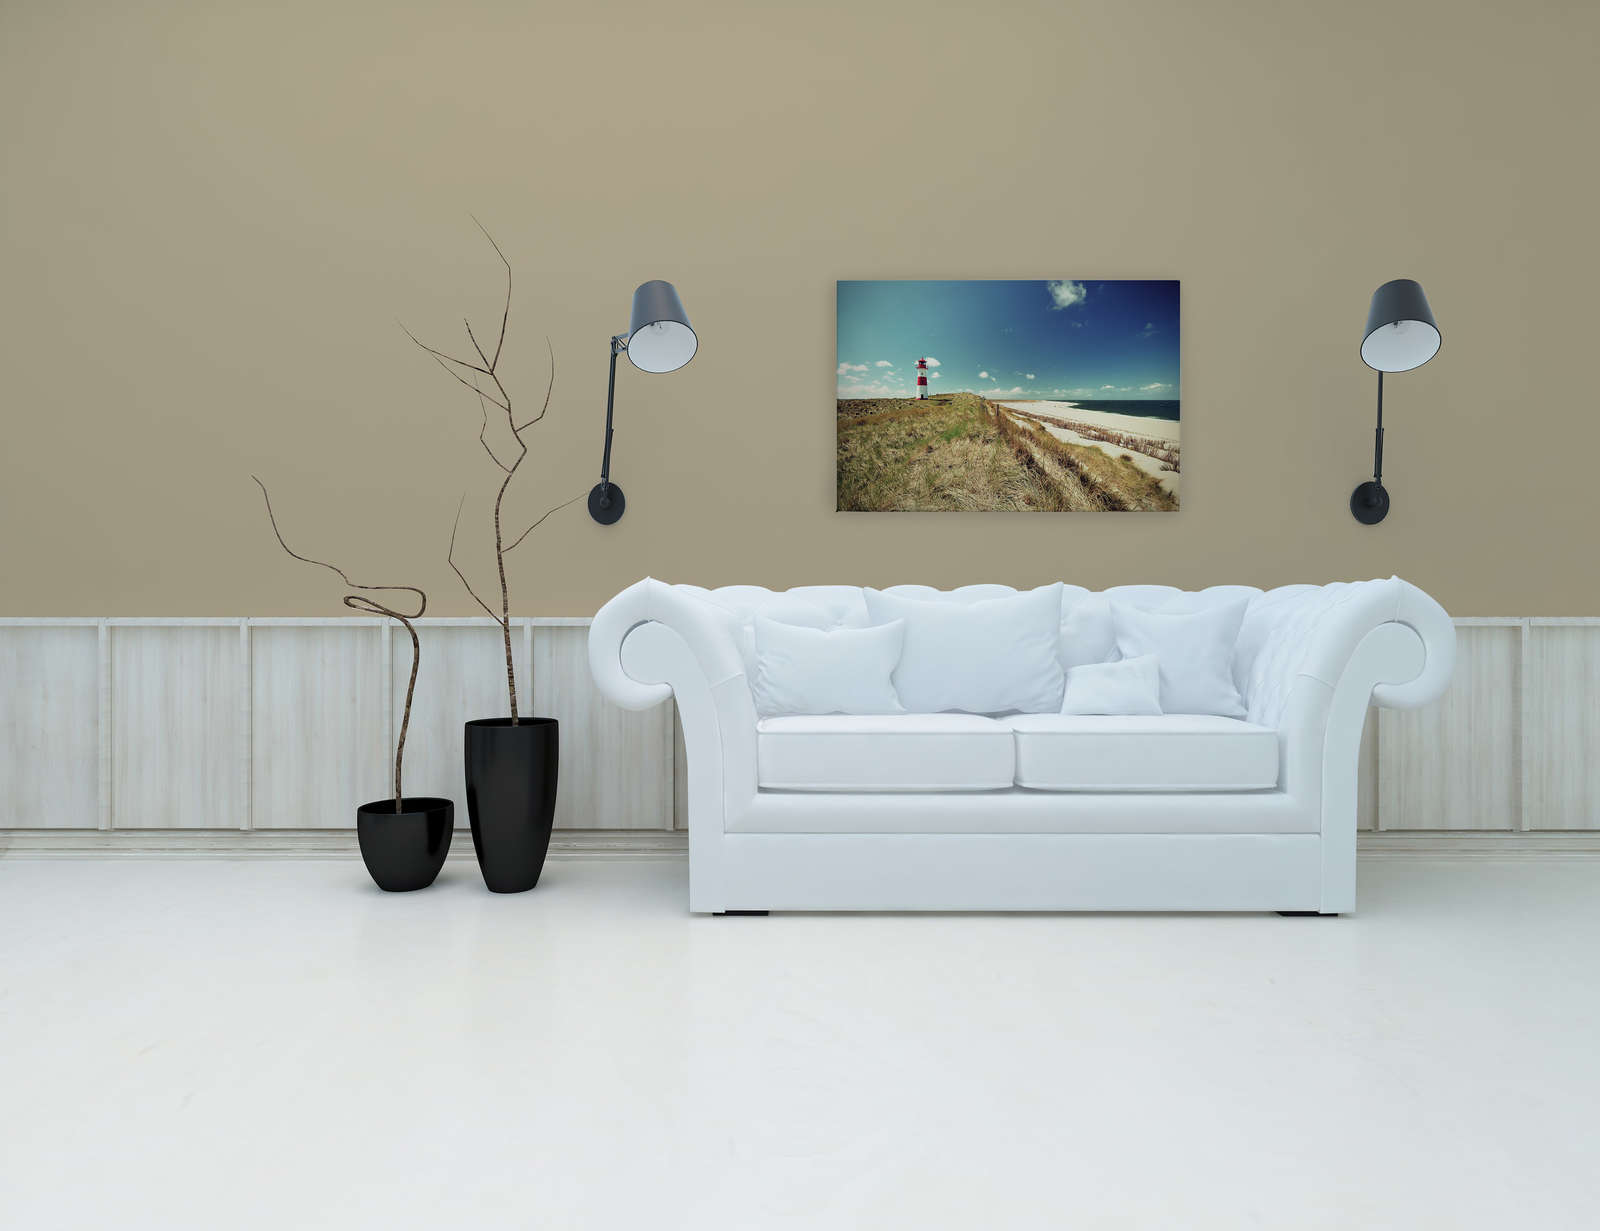             Canvas with beach landscape with lighthouse - 0.90 m x 0.60 m
        